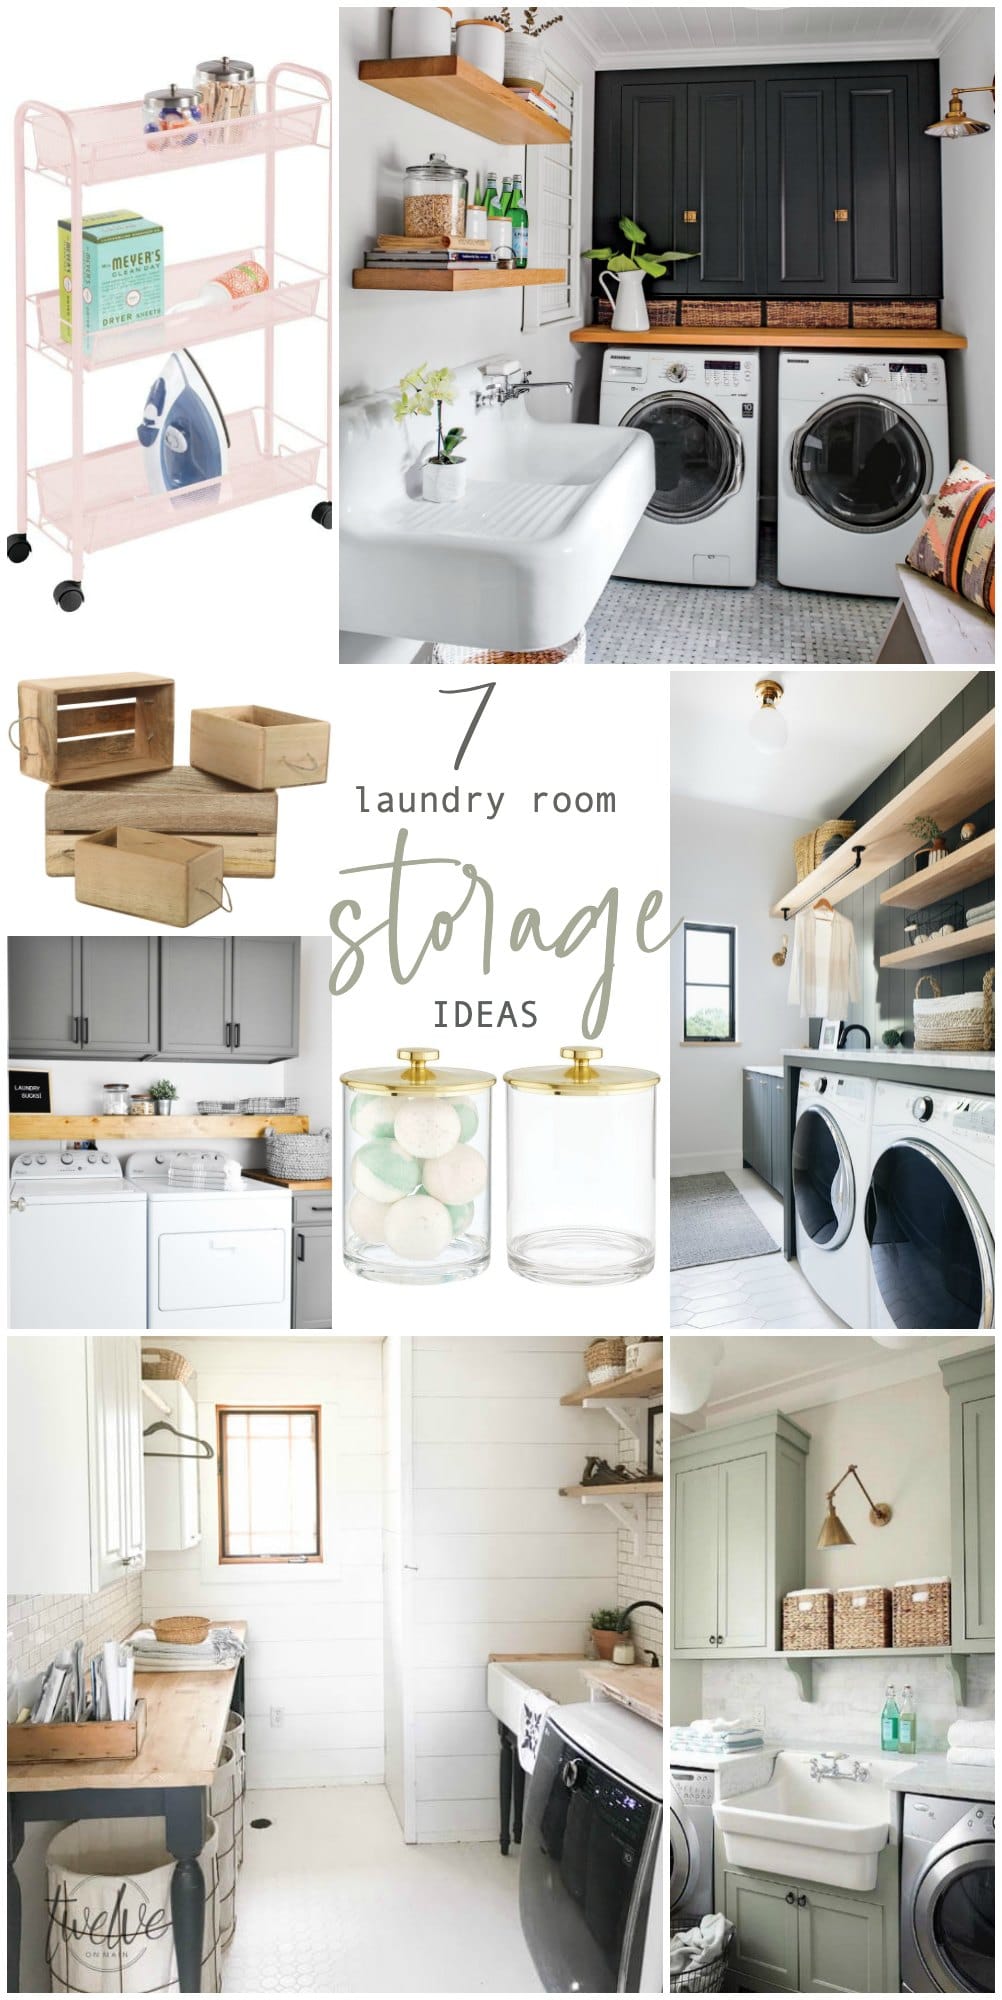 Small Laundry Room Ideas With Sink